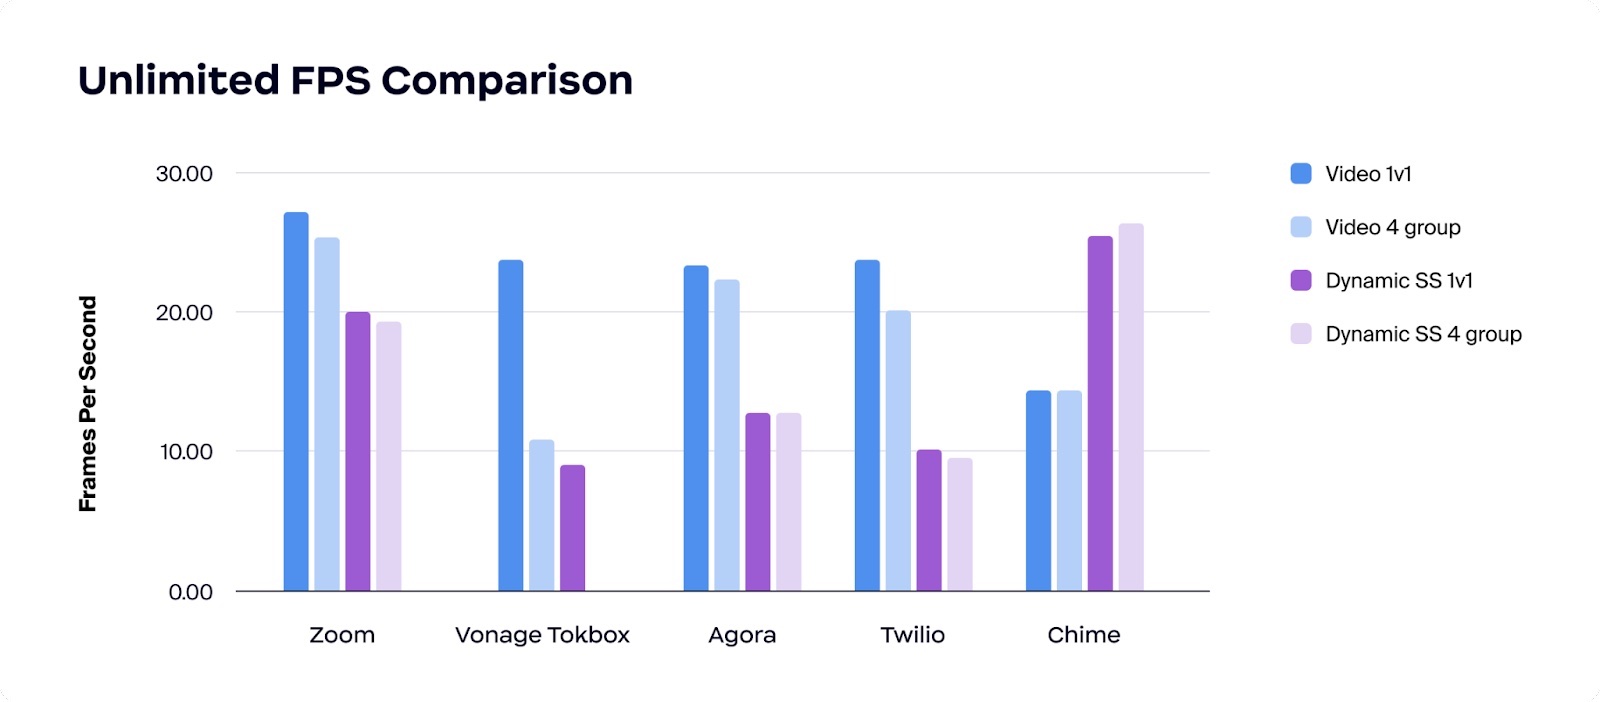 Zoom Video SDK frames-per-second performance is higher compared to Vonage Tokbox, Agora, Twilio Programmable Video, and Chime. 